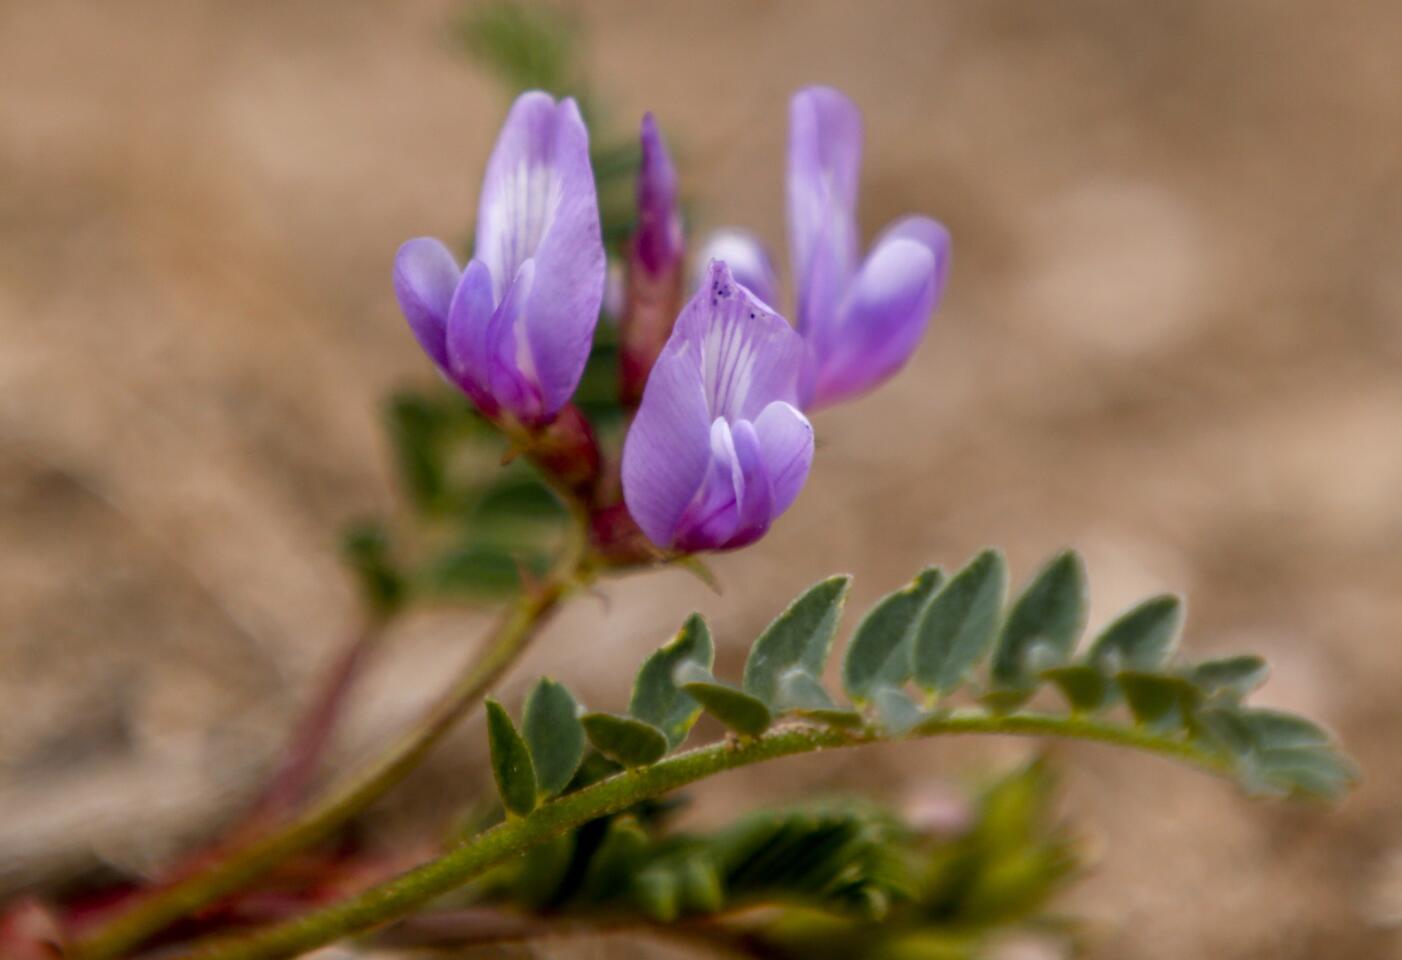 Wildflowers begin to emerge along the South Rim at Mojave Point on March 11, 2015.